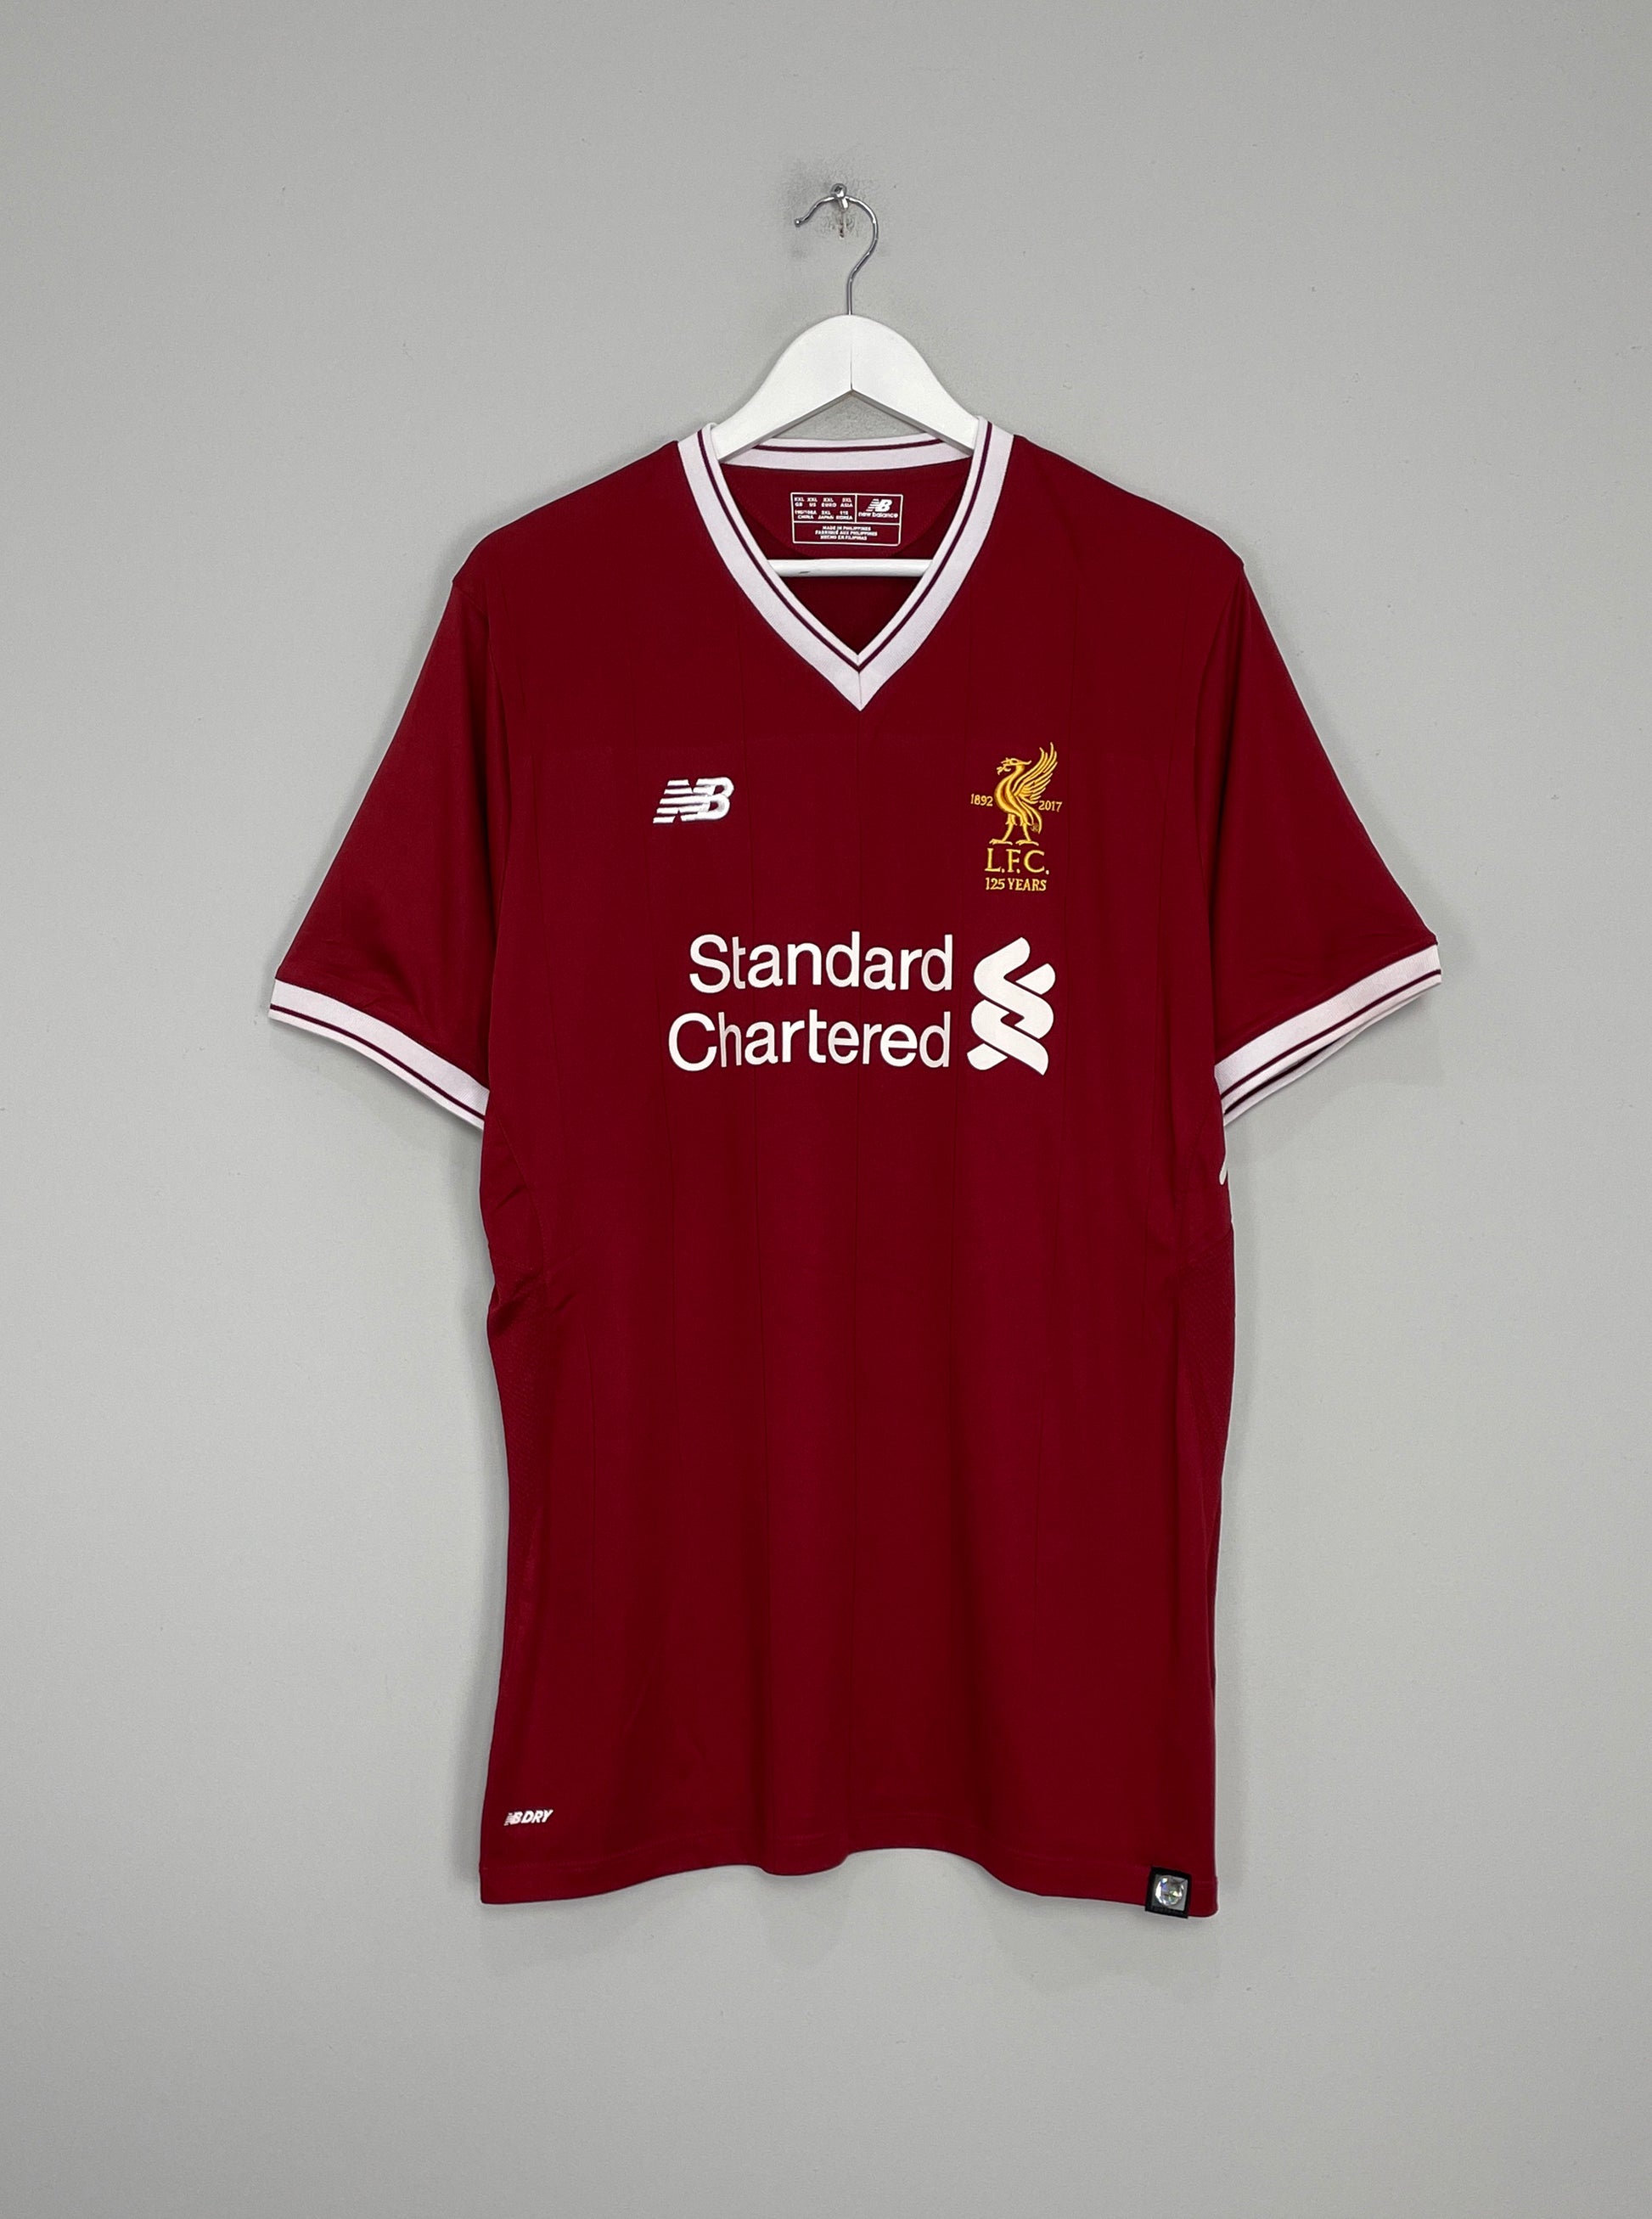 Image of the Liverpool shirt from the 2017/18 season